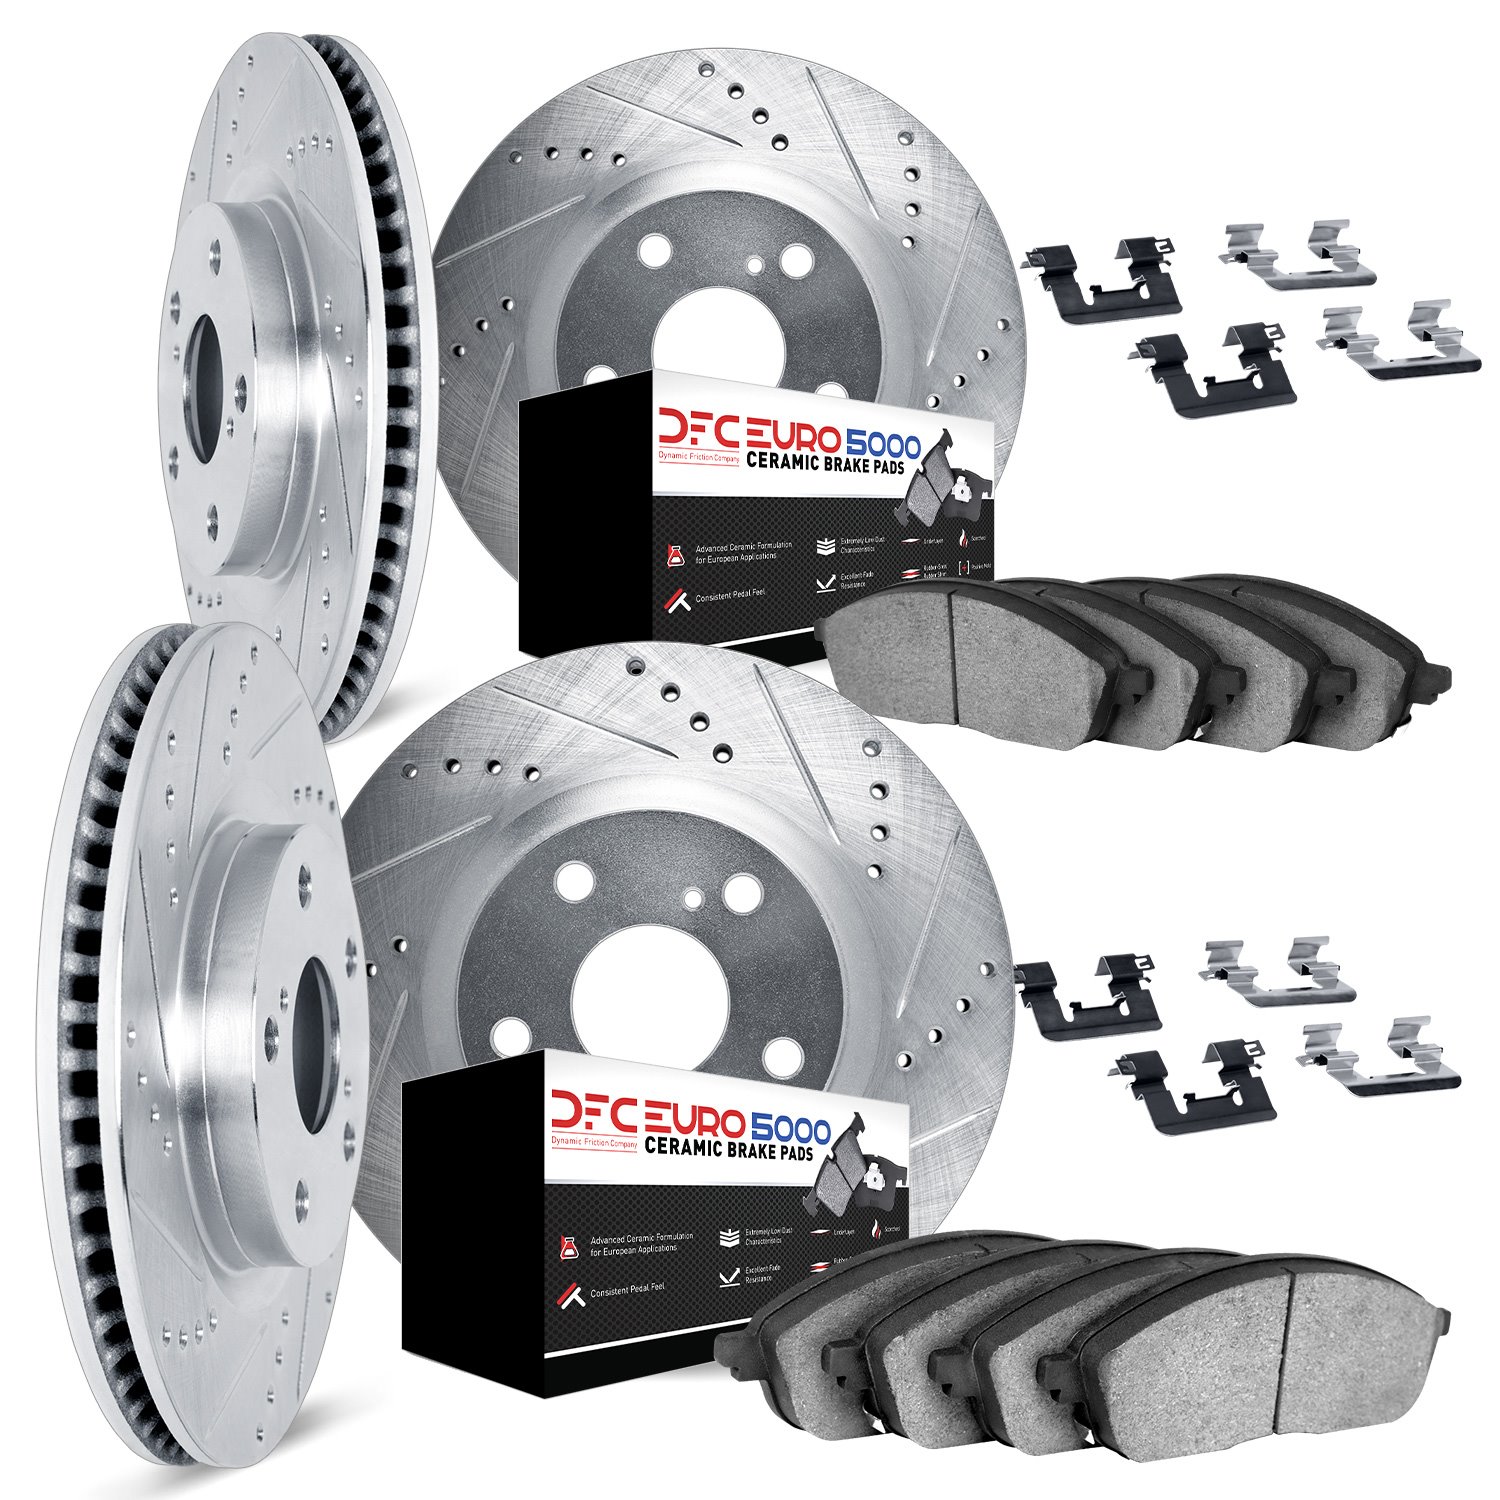 7614-31021 Drilled/Slotted Brake Rotors w/5000 Euro Ceramic Brake Pads Kit & Hardware [Silver], 2008-2010 BMW, Position: Front a